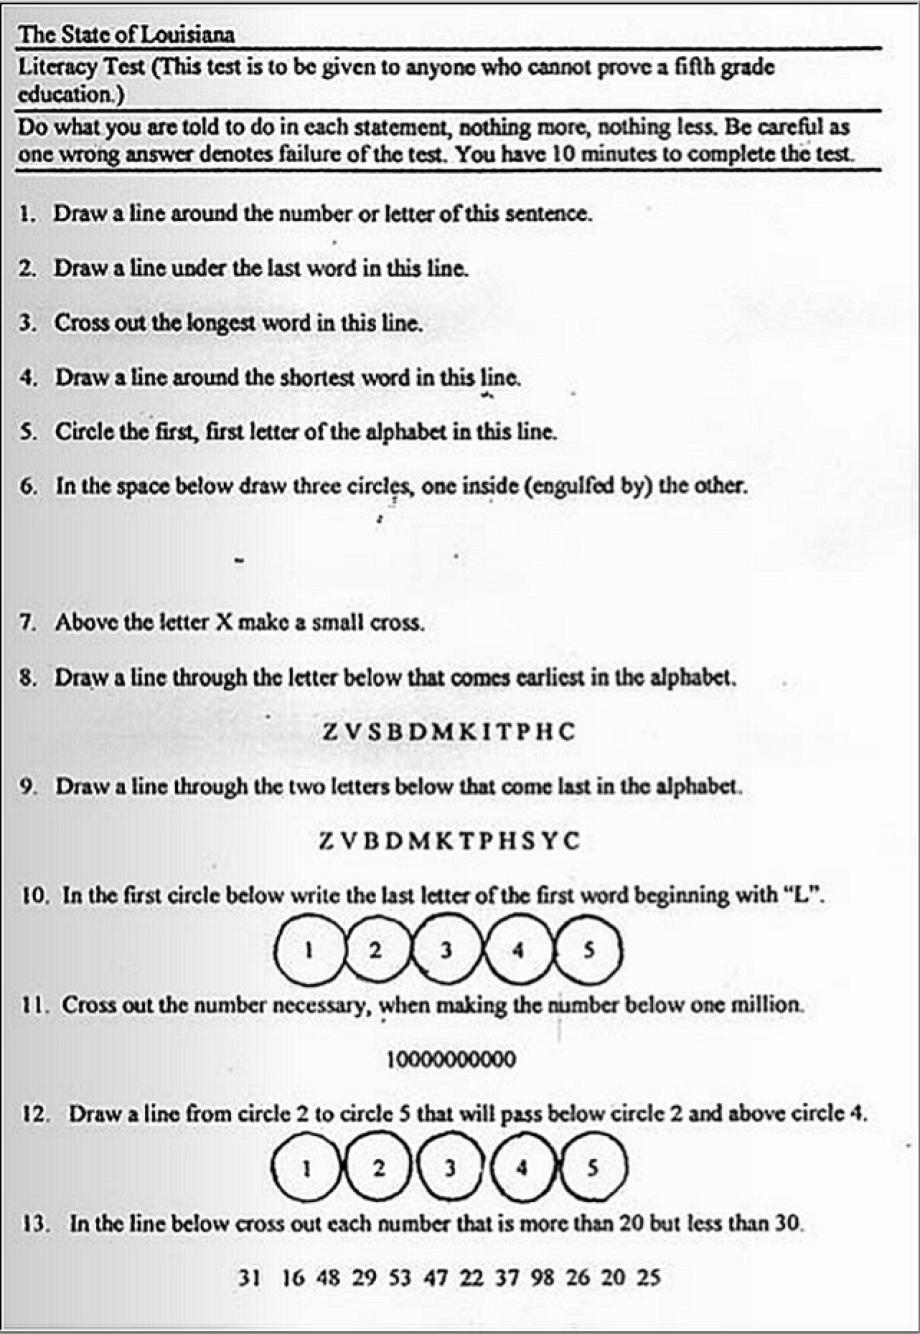 Page one of the 3-page literacy test black Louisianans had to pass before they were allowed to vote.